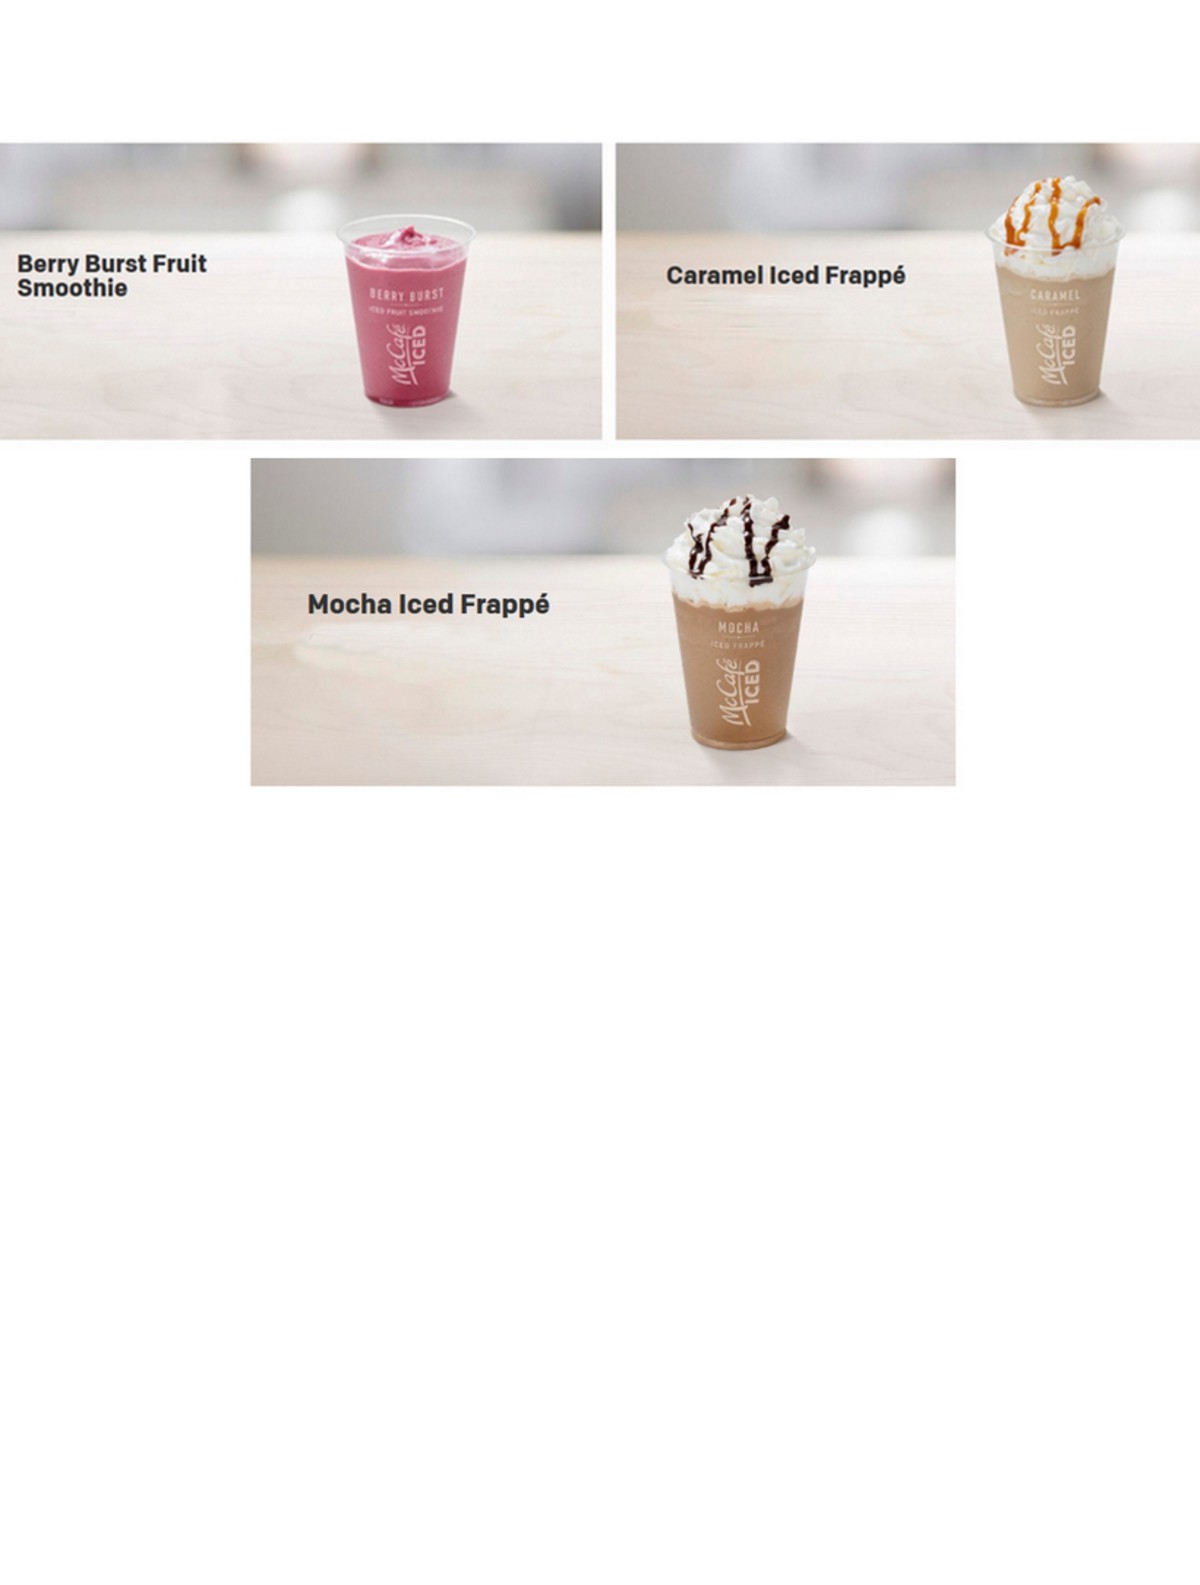 McDonald's Offers from 1 April